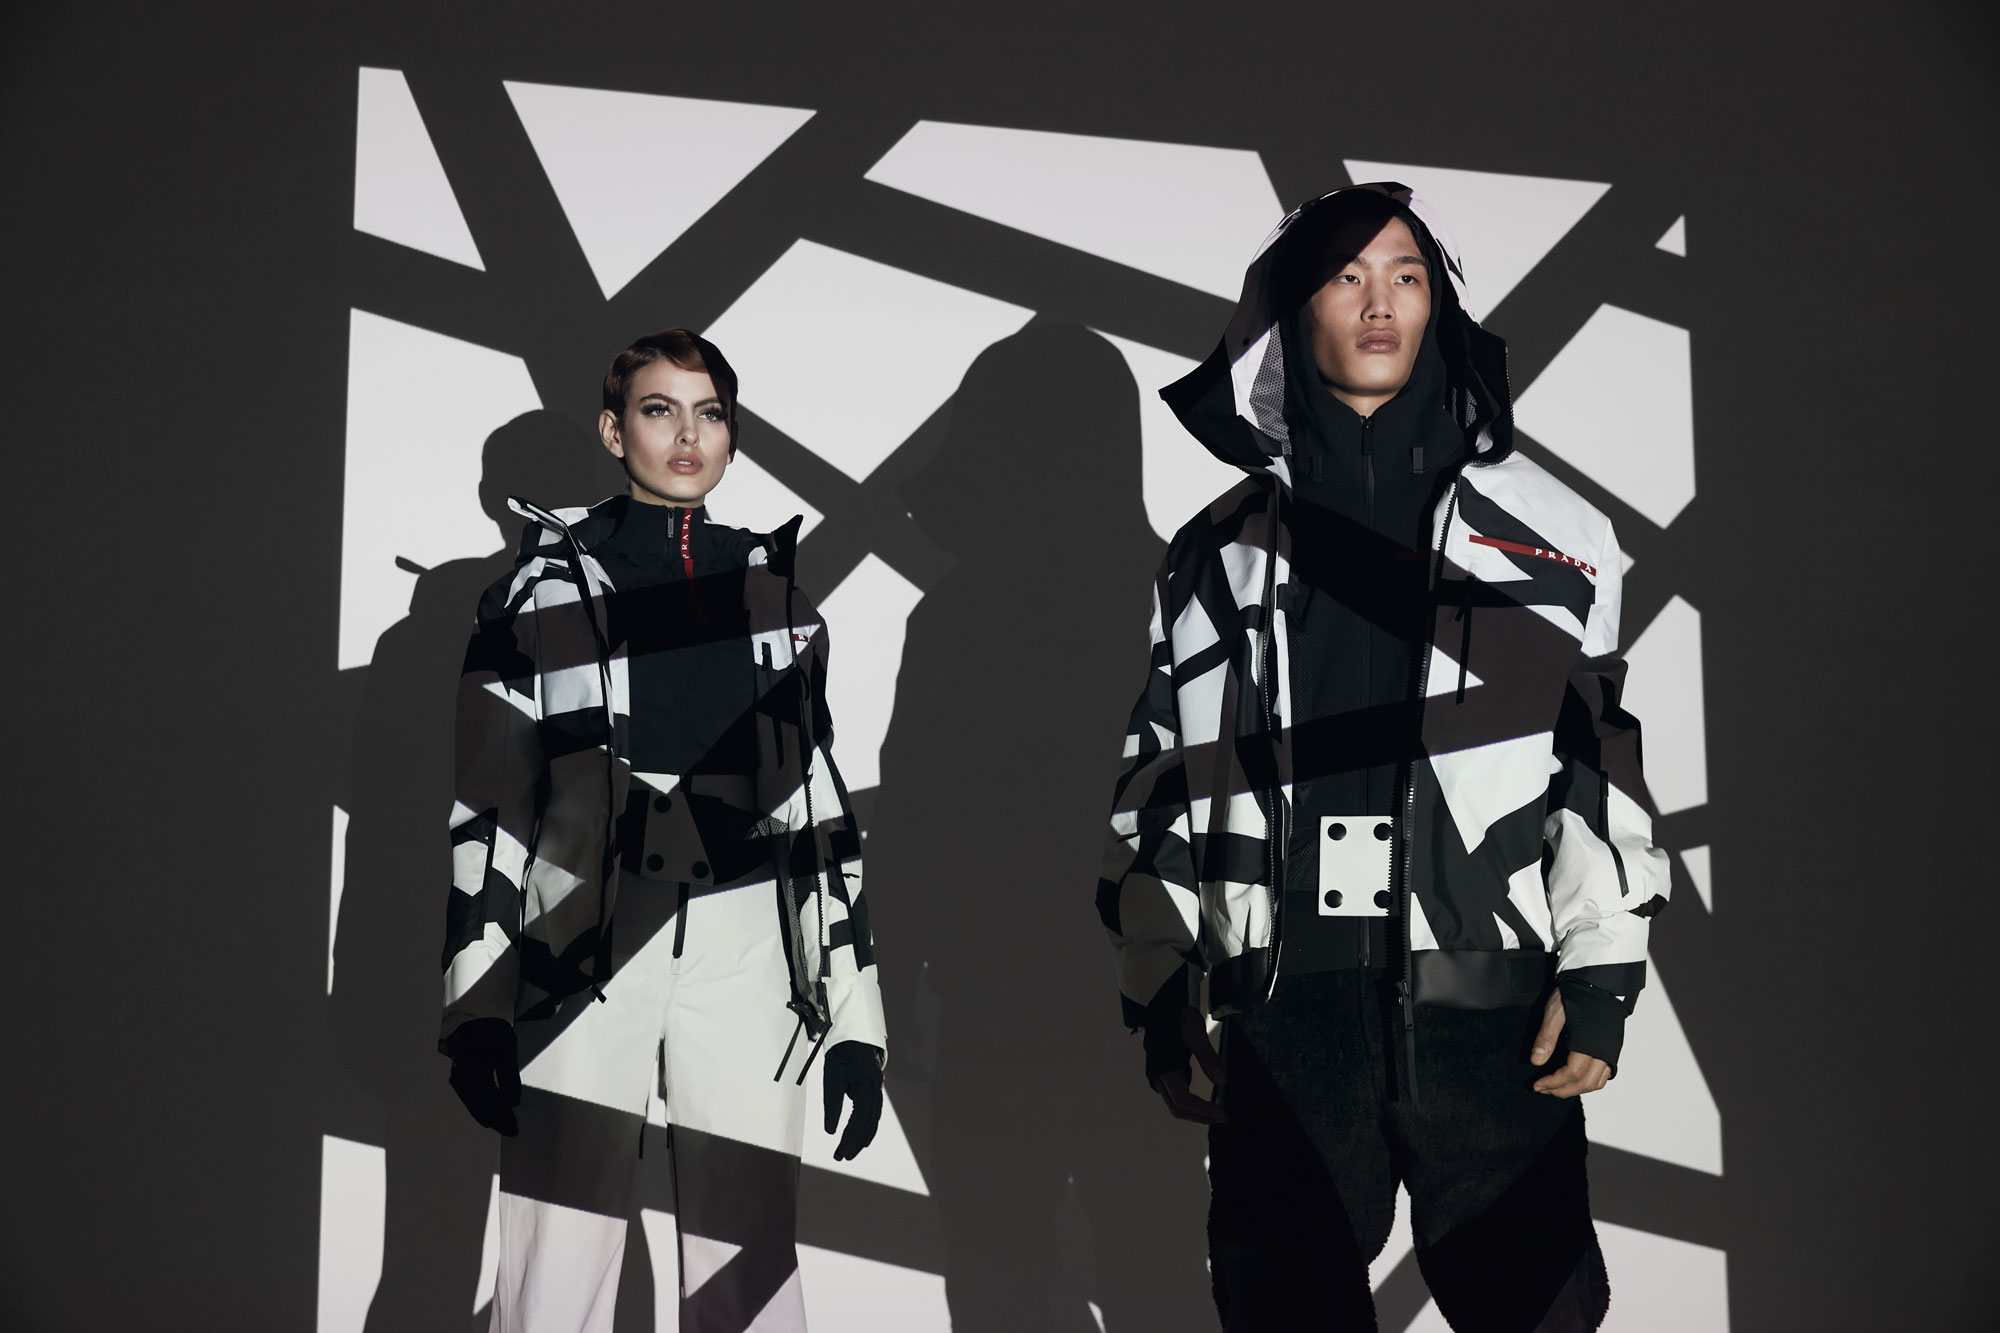 Aspenx Teamed Up With Prada on This Limited-Edition Collection